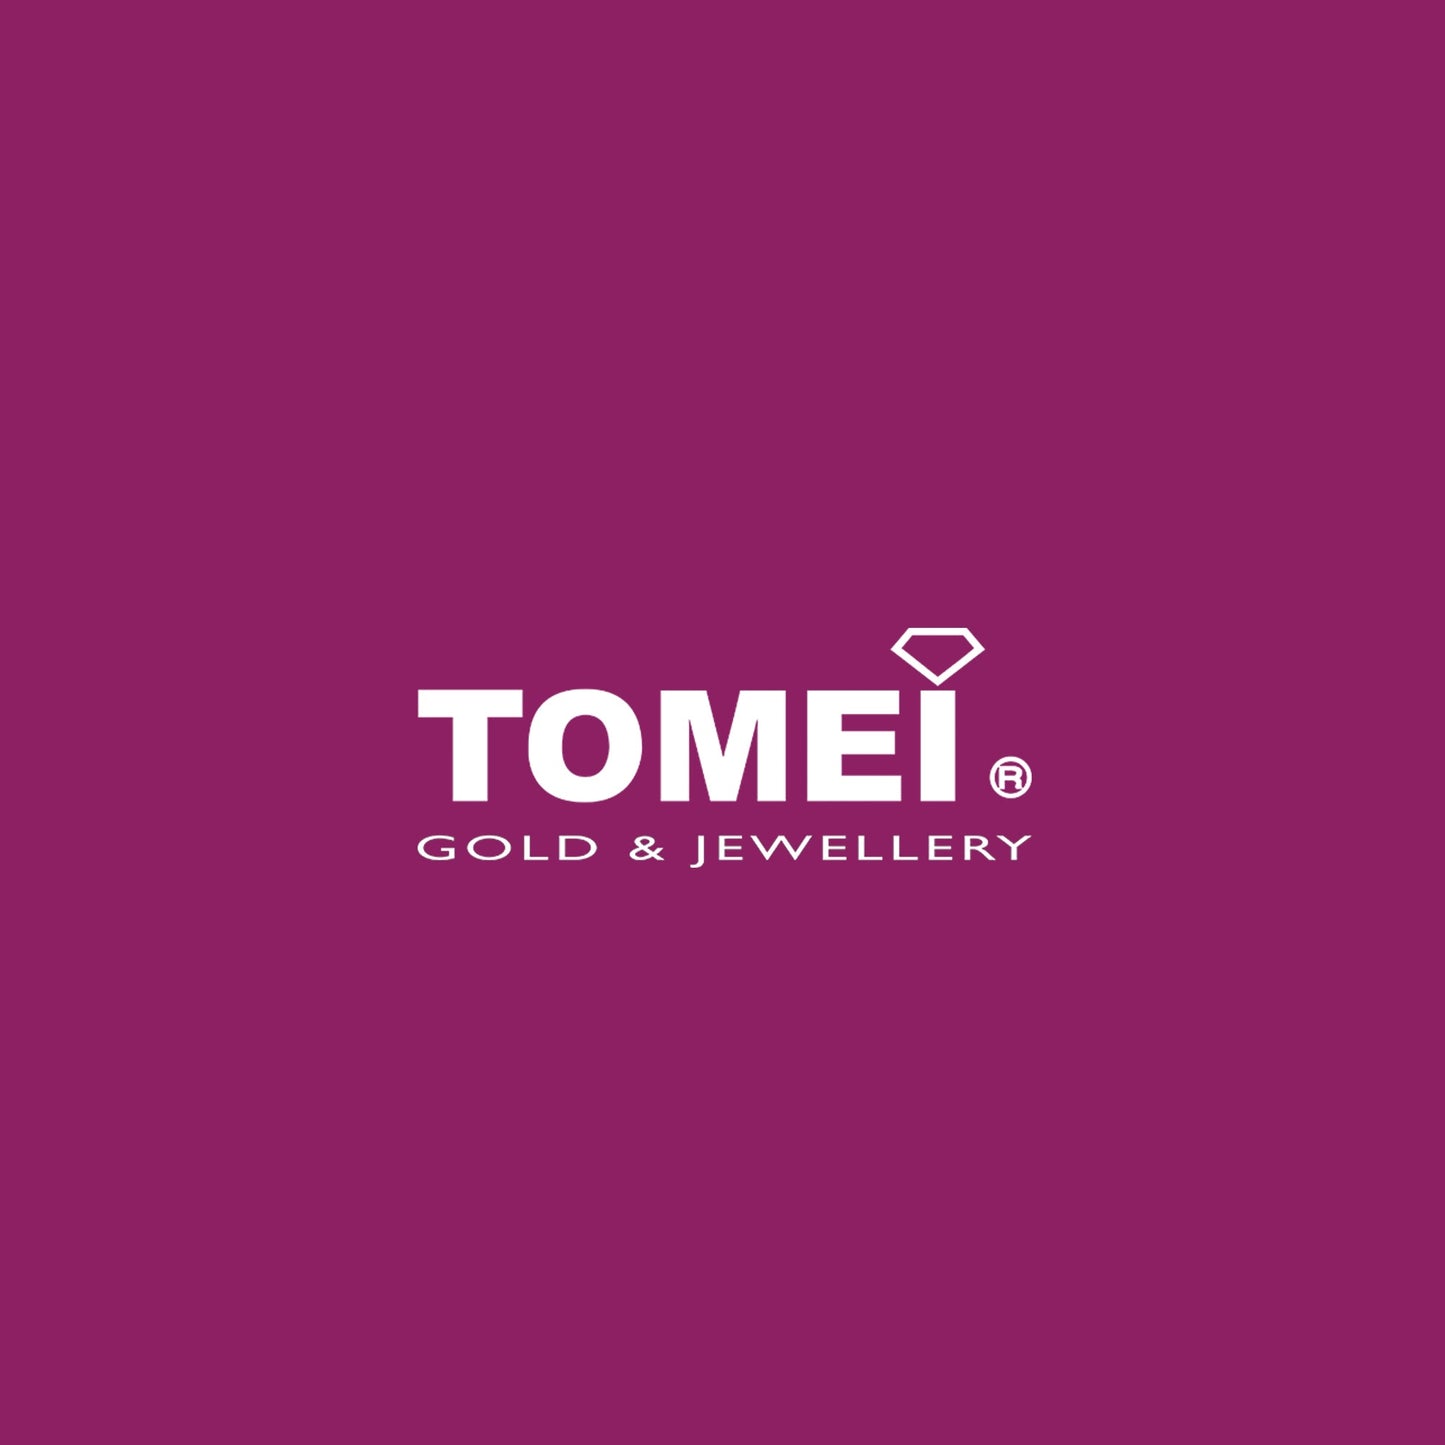 TOMEI Sweet Blessings Snake Pendant, Yellow Gold 916